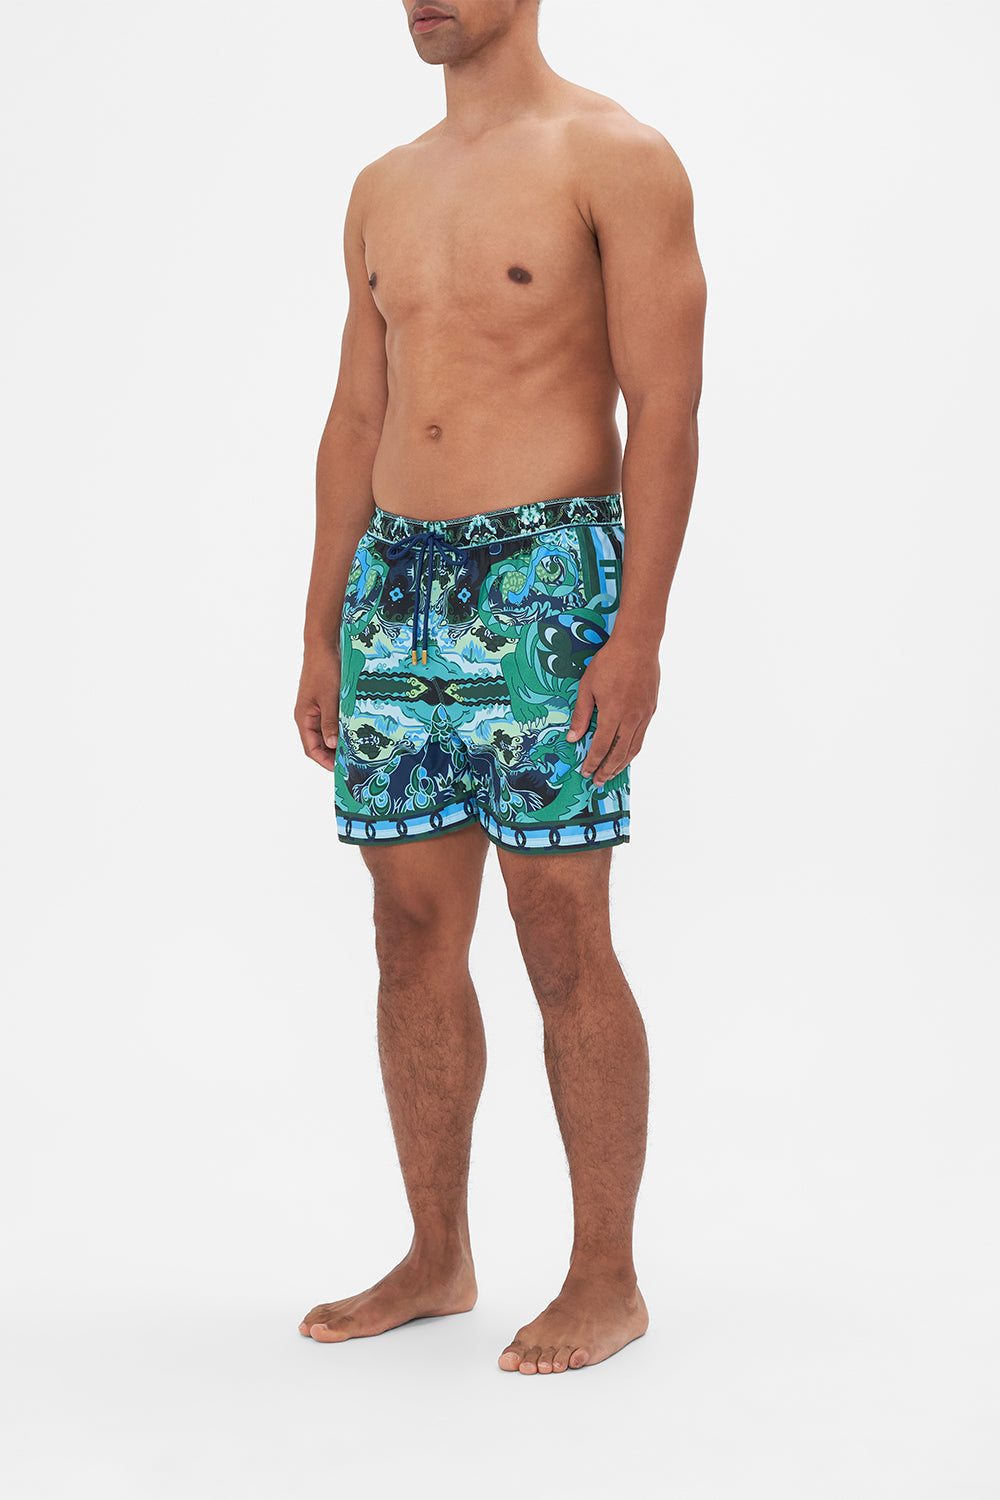 Hotel Franks By CAMILLA mens boardshorts in These Walls Are Talking print